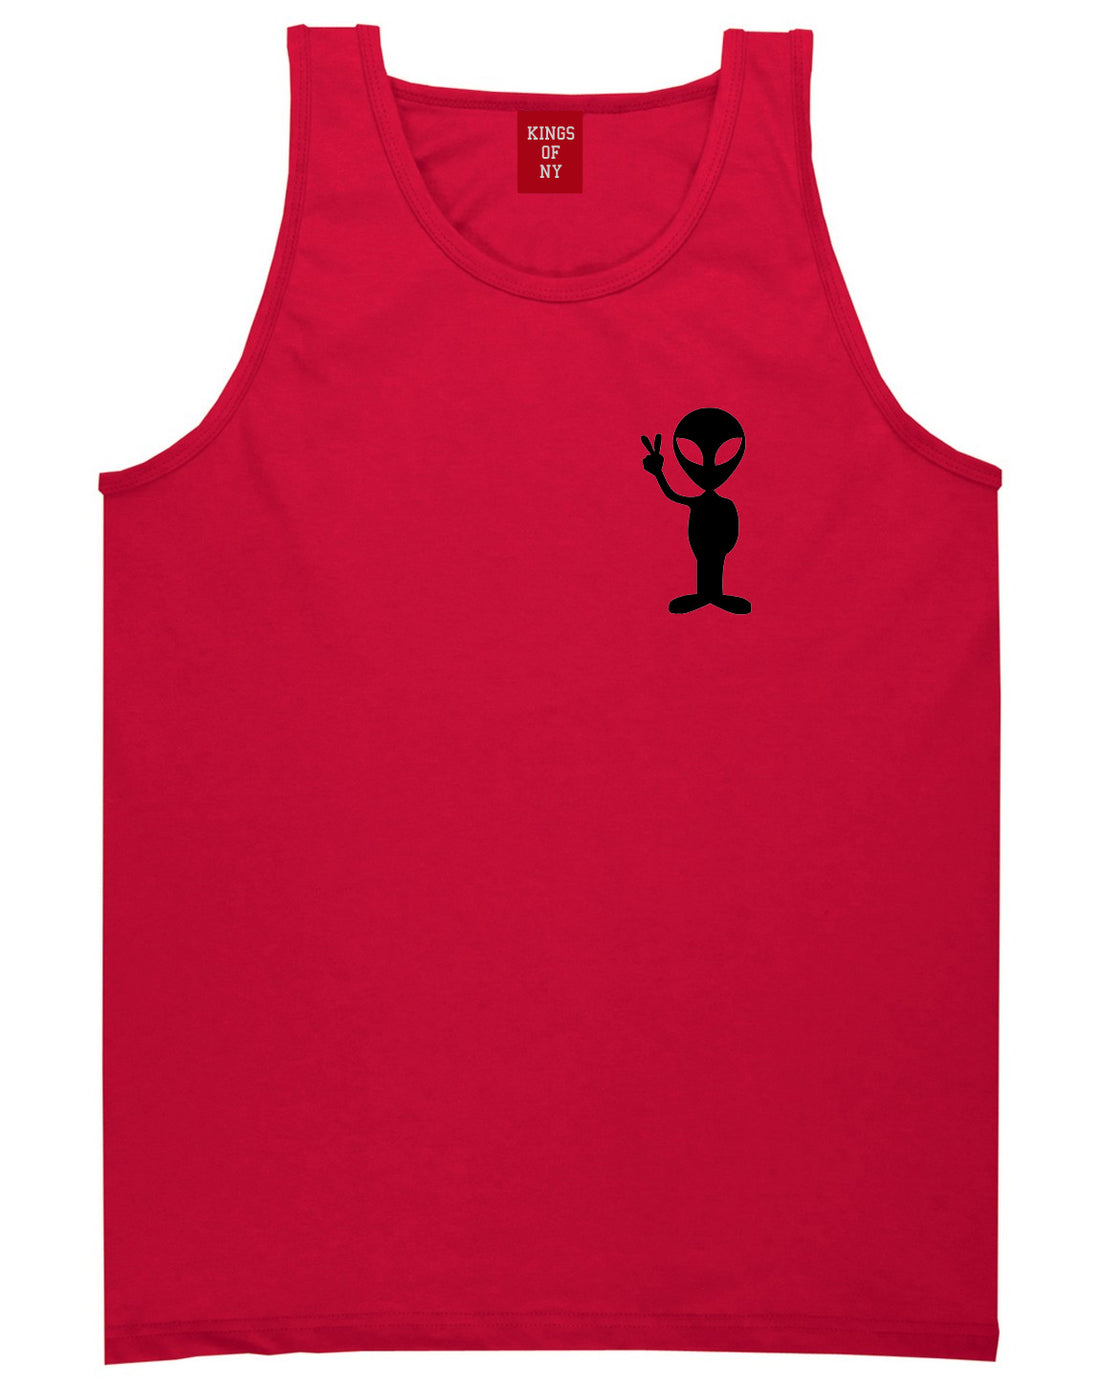 Alien Peace Sign Chest Red Tank Top Shirt by Kings Of NY